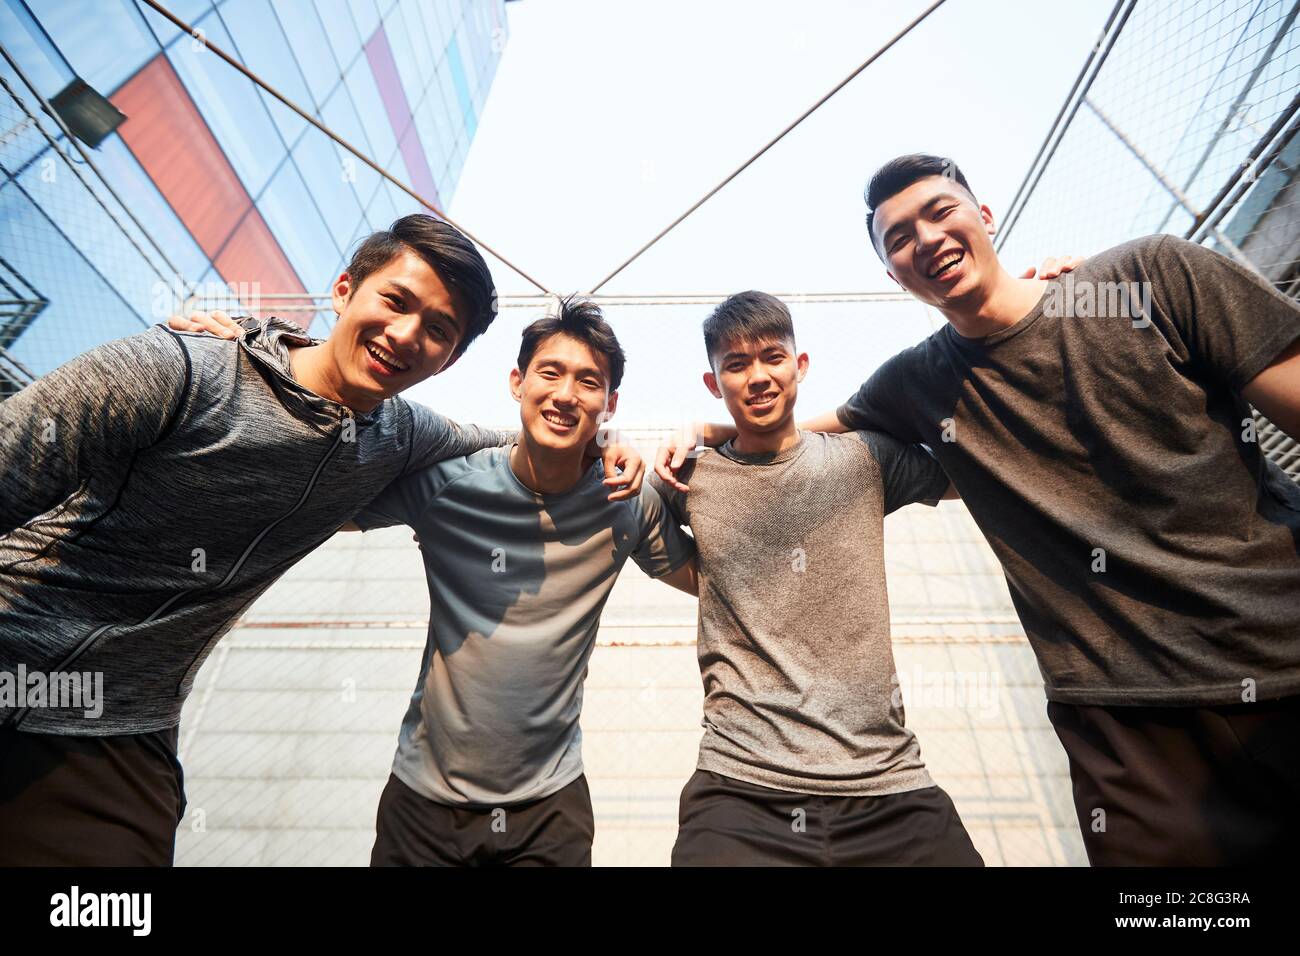 portrait of a team of young asian athletes looking down at camera smiling Stock Photo